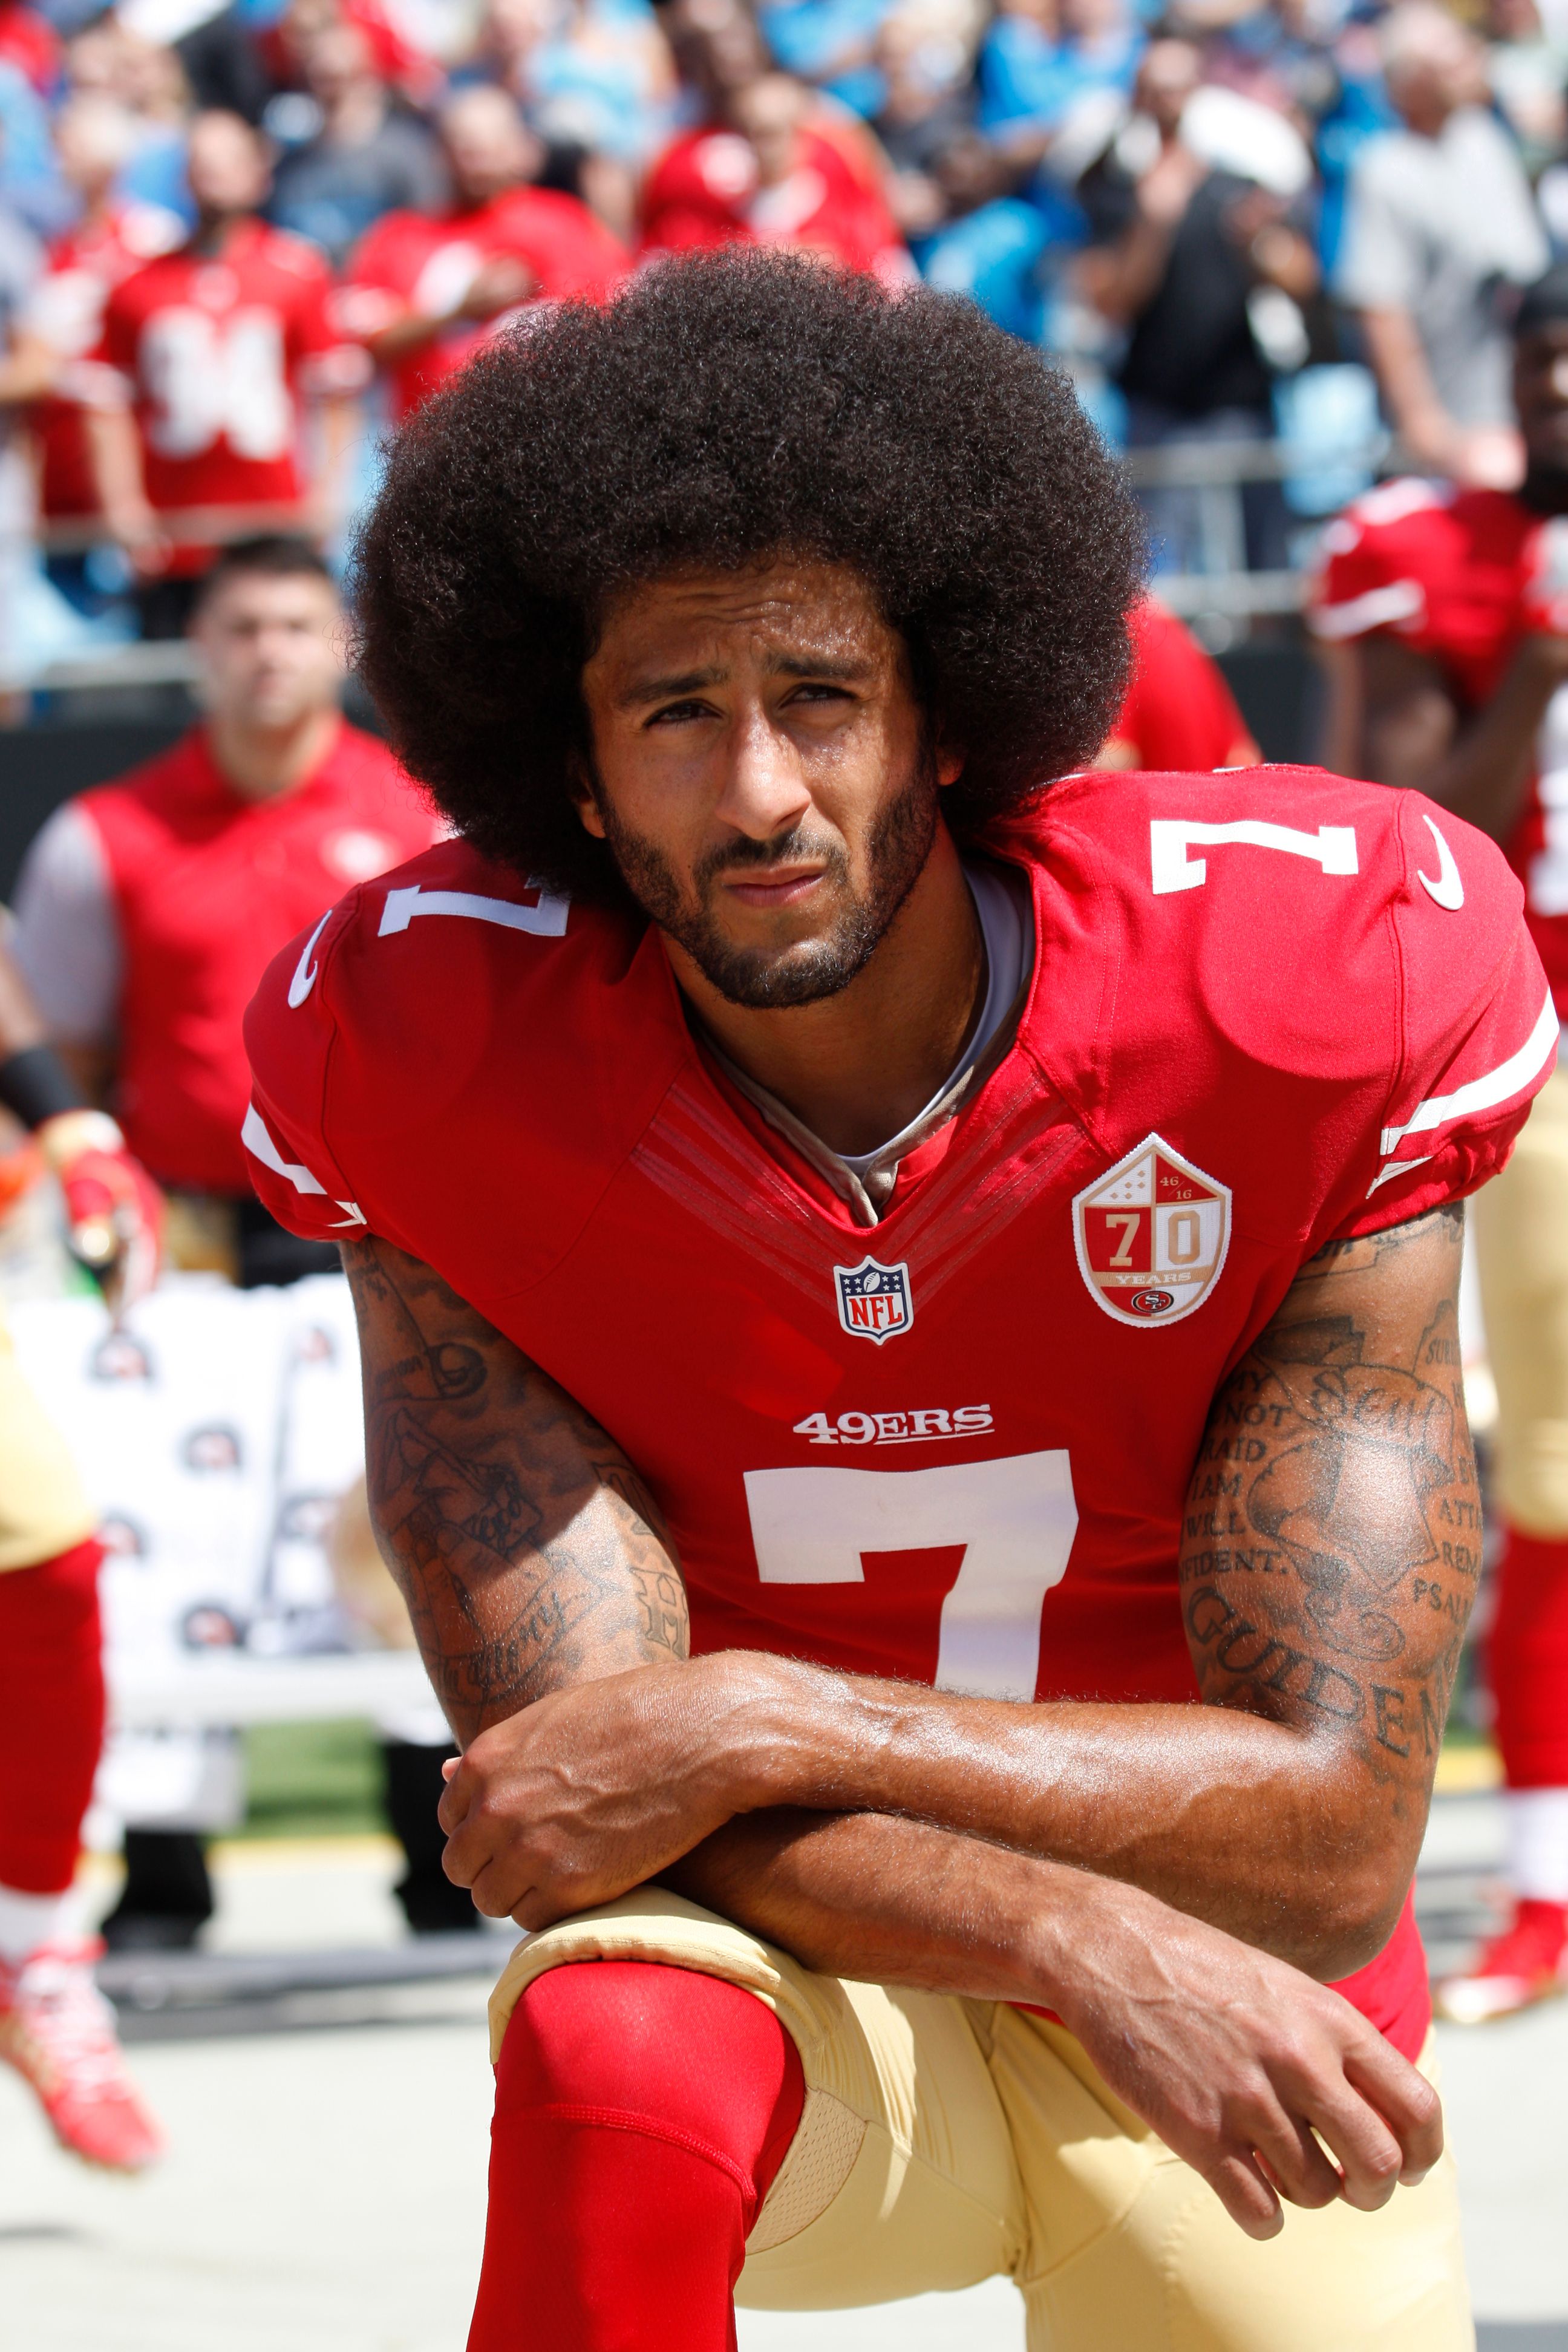 Colin Kaepernick kneels down during a San Francisco 49ers game in protest of police brutality | Source: Getty Images